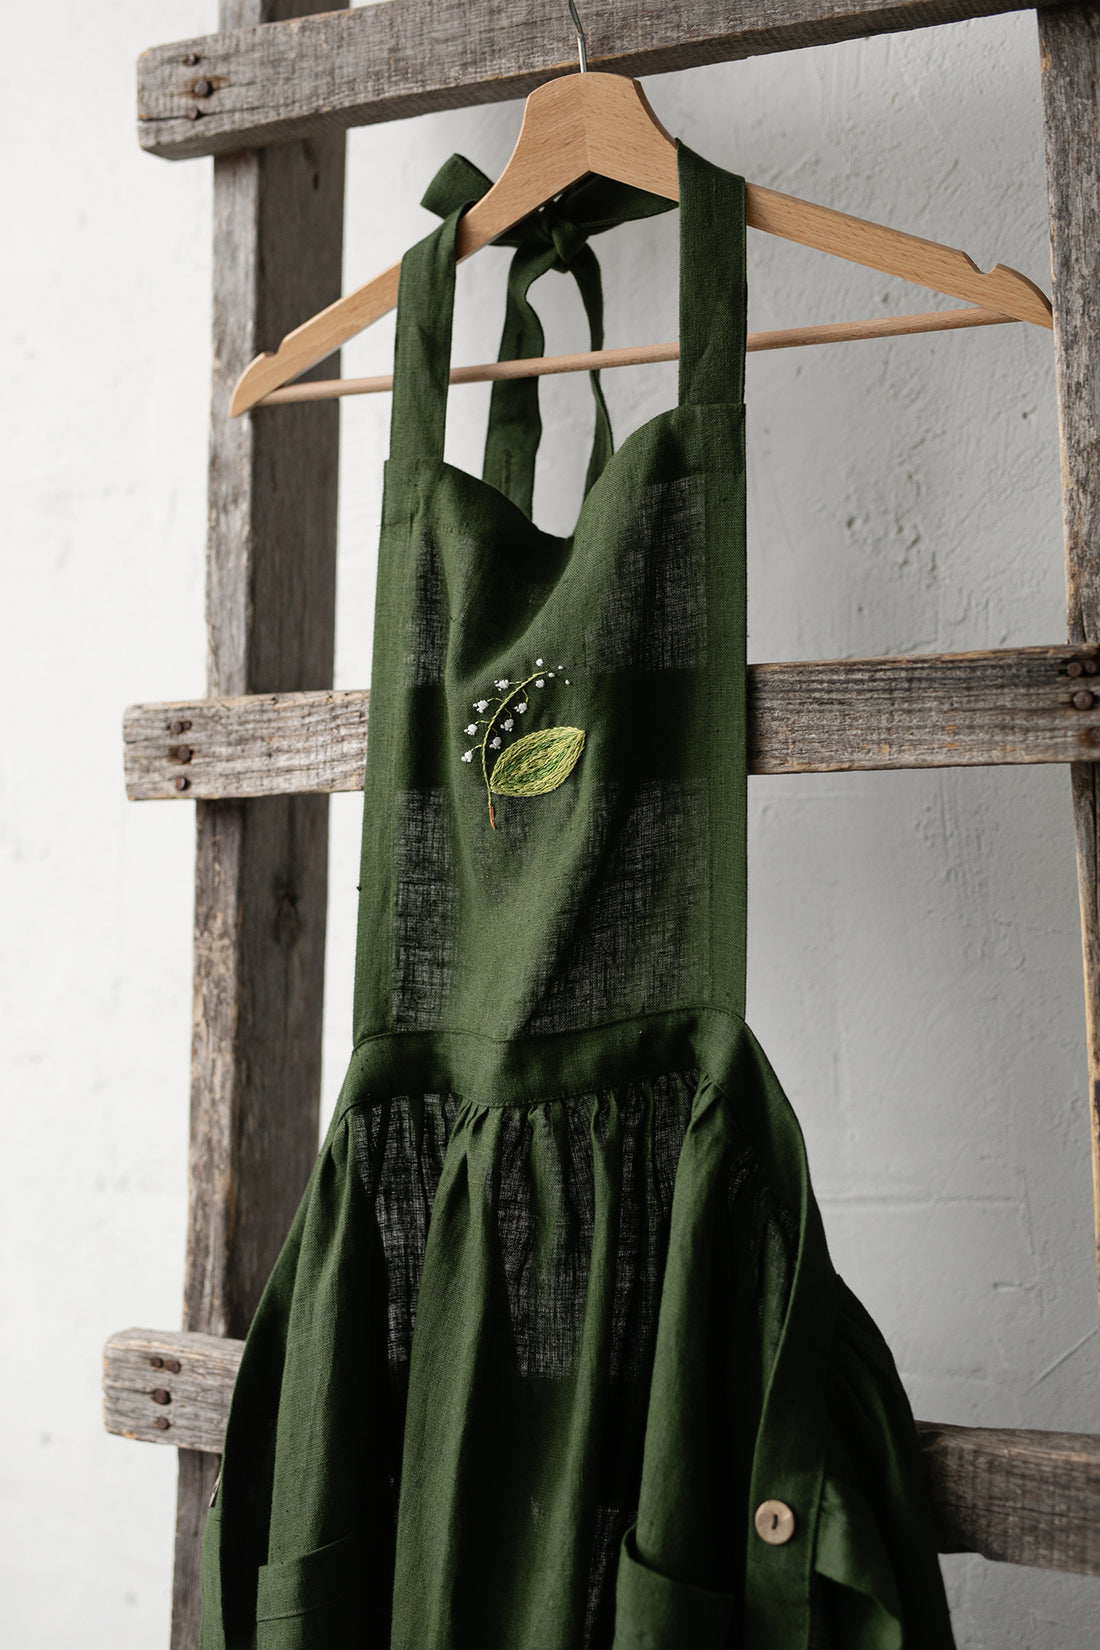 Forest Green Midi Cross Back Pinafore